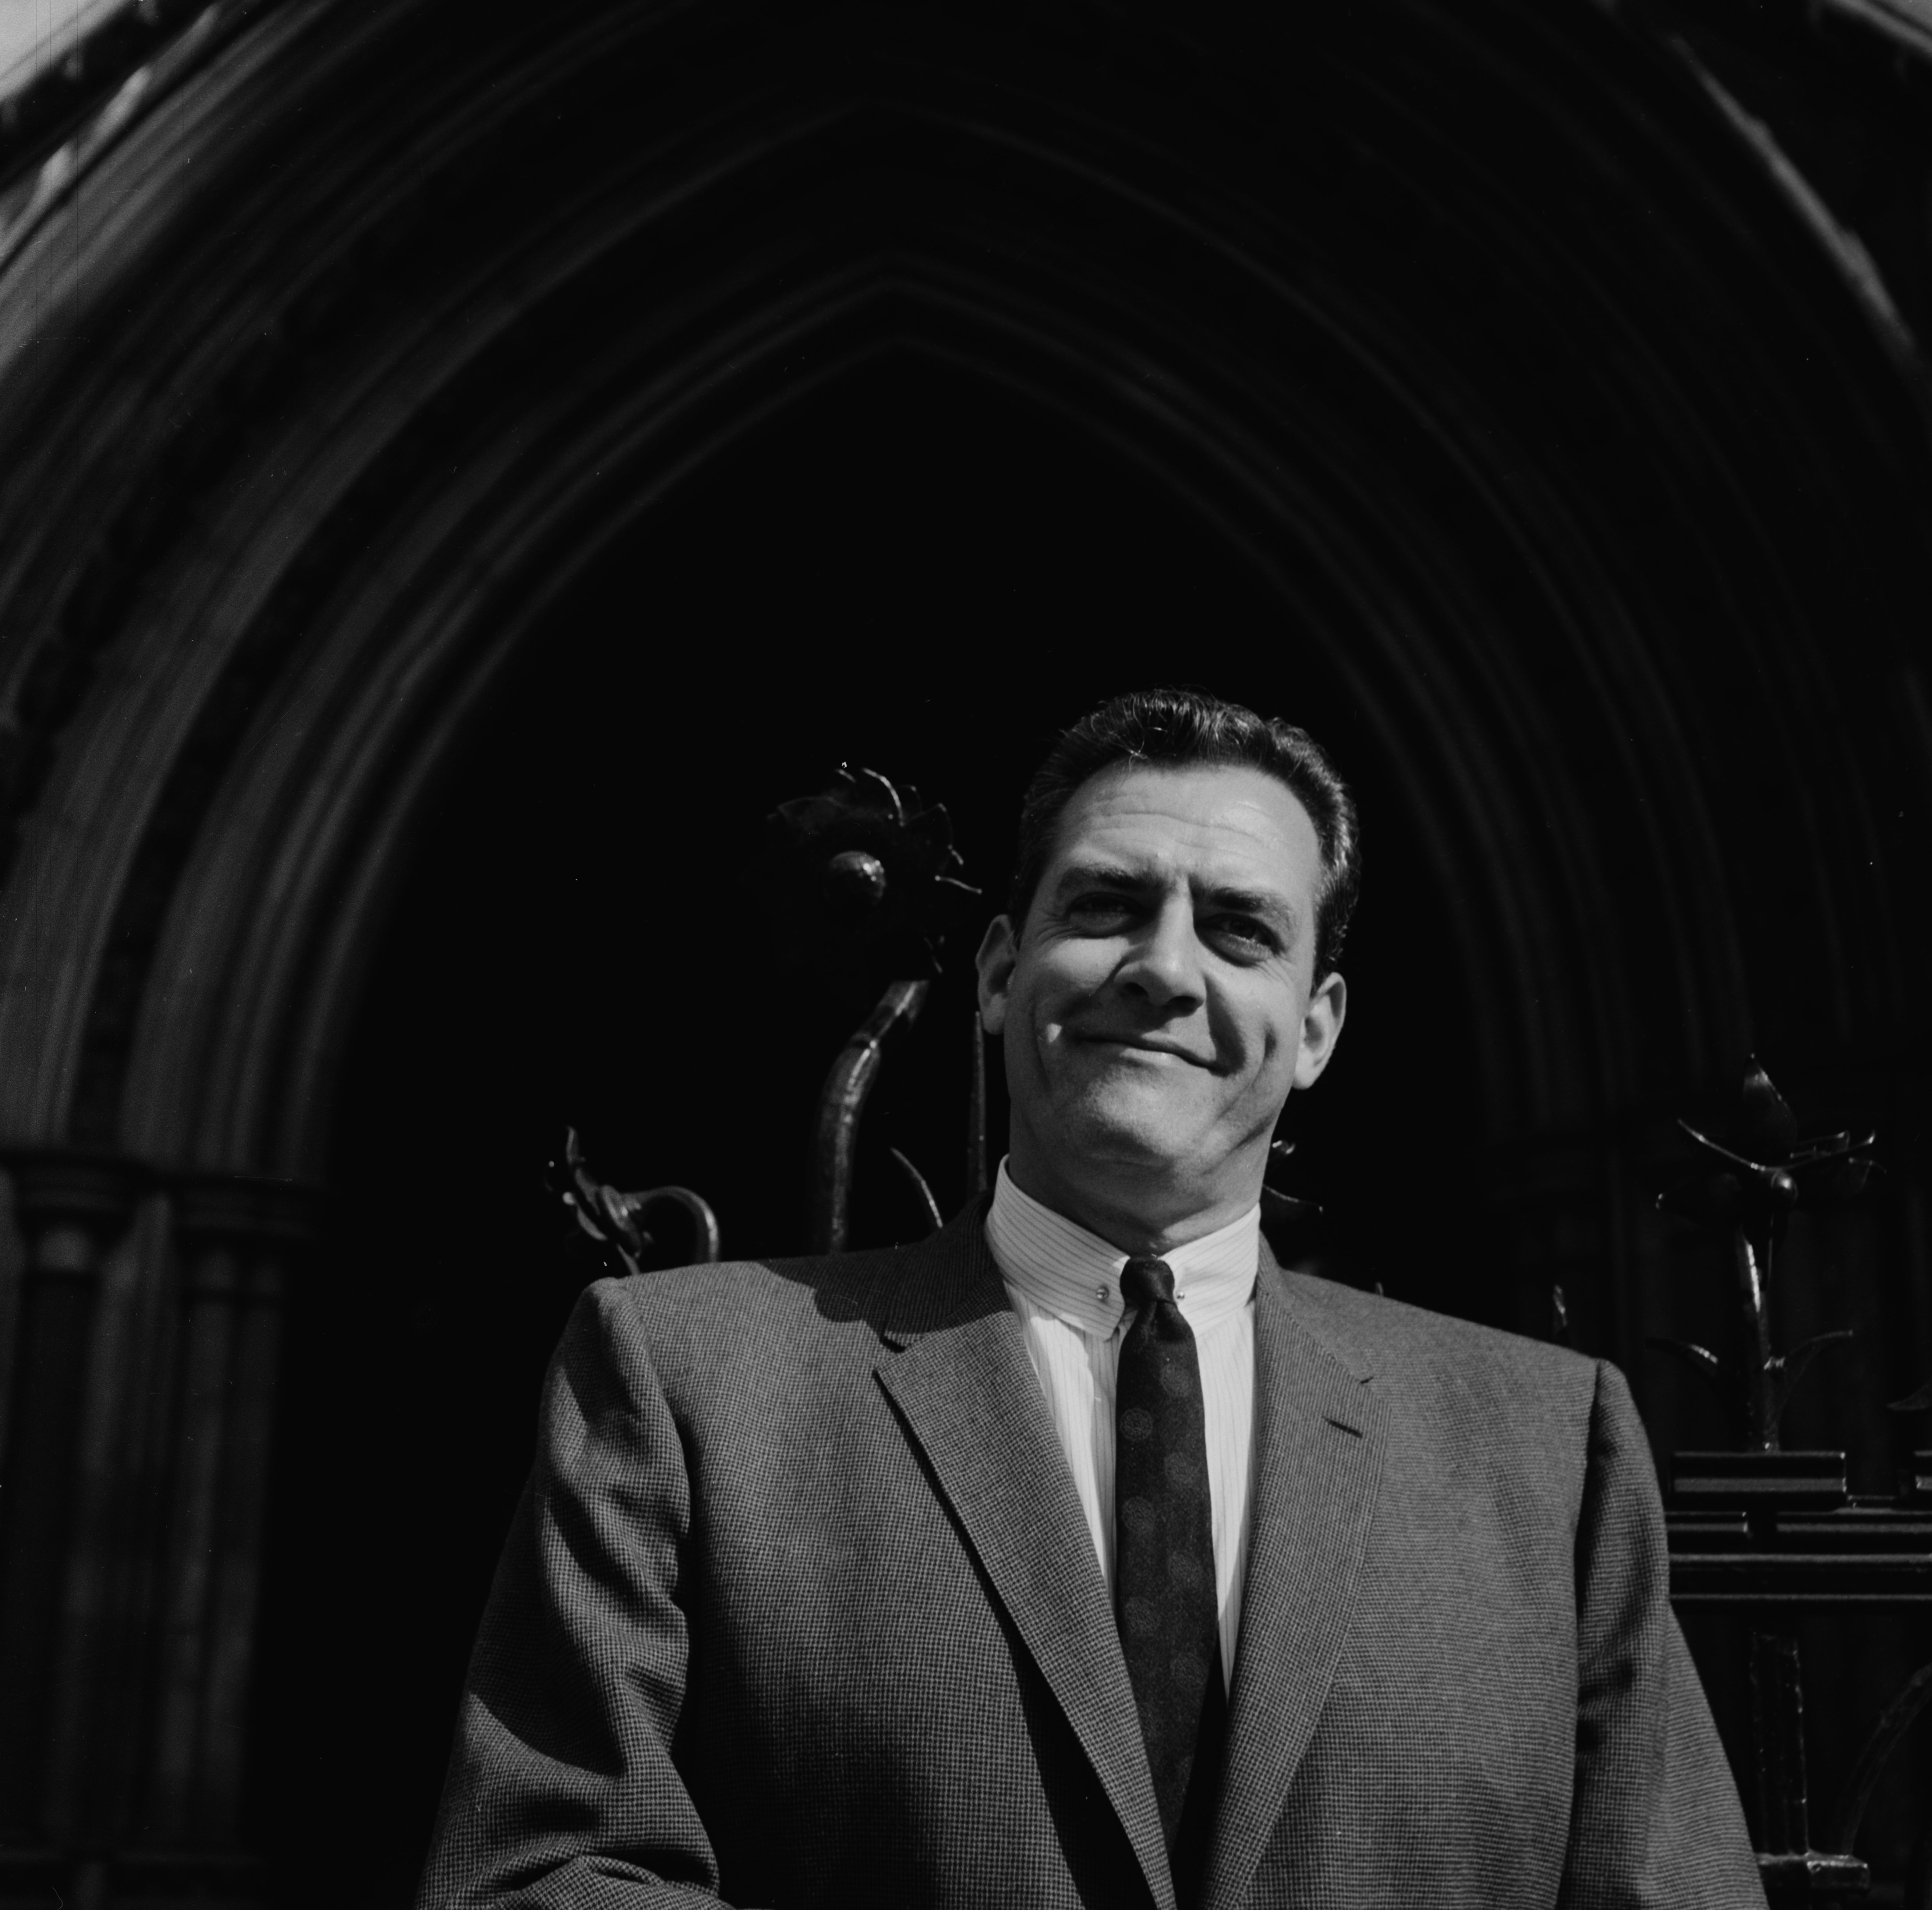 Raymond Burr pictured outside the Royal Courts of Justice during a promotional tour for "Perry Mason," London, 1961. | Source: Getty Images